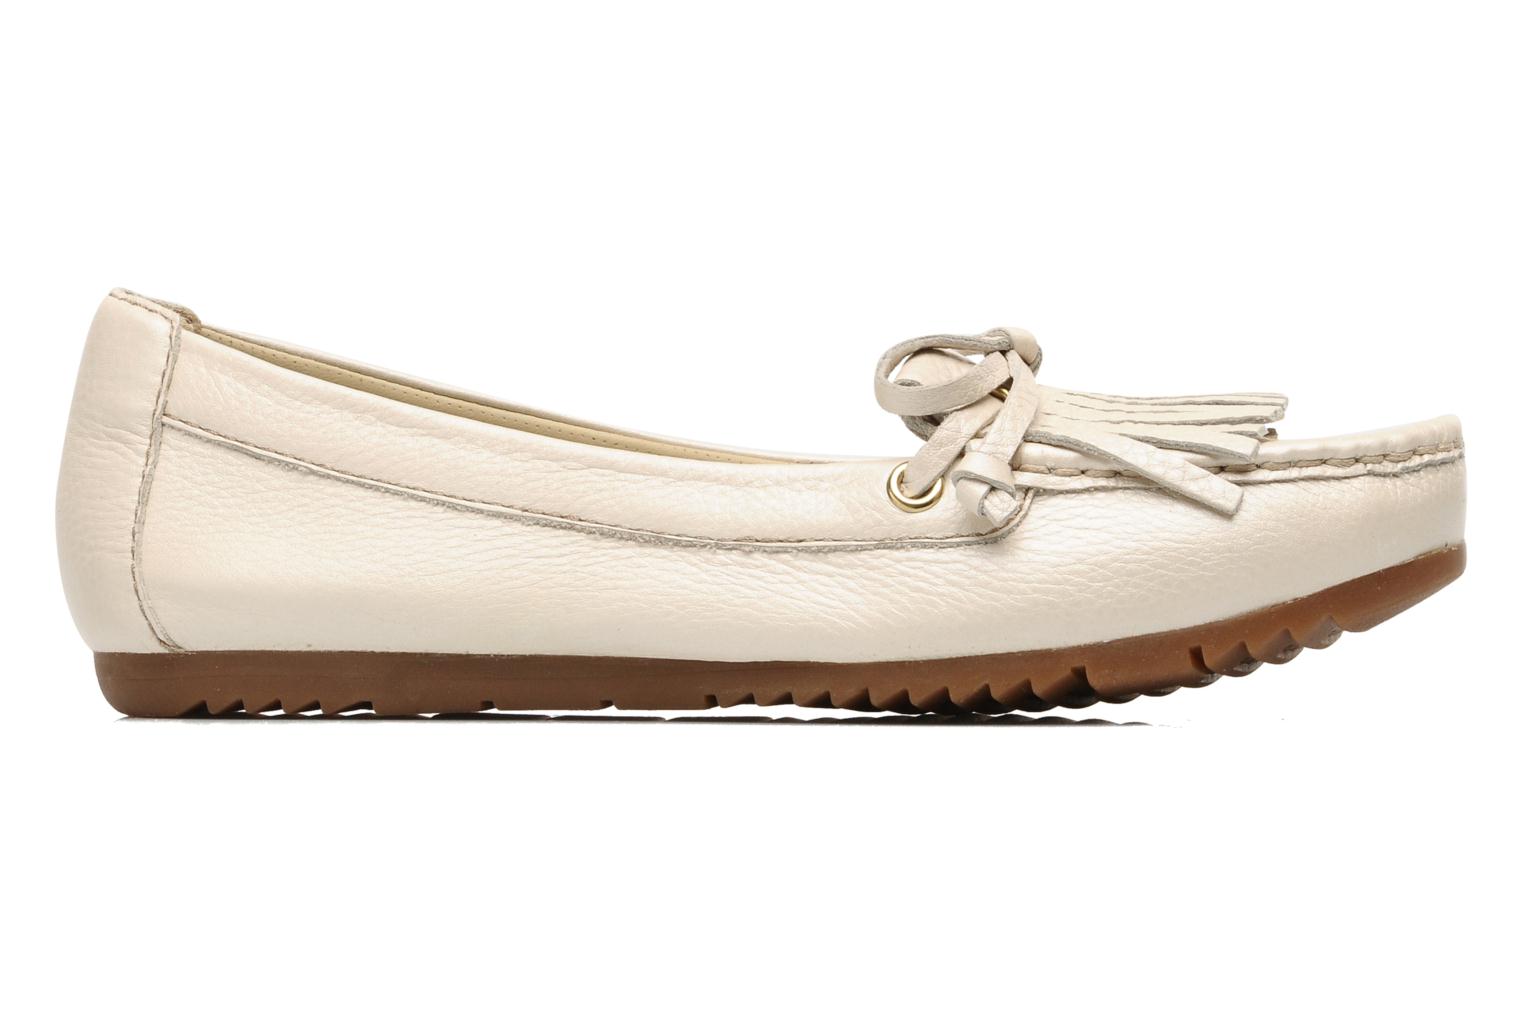 Geox D MILOU E Loafers in Beige at Sarenza.co.uk (131491)